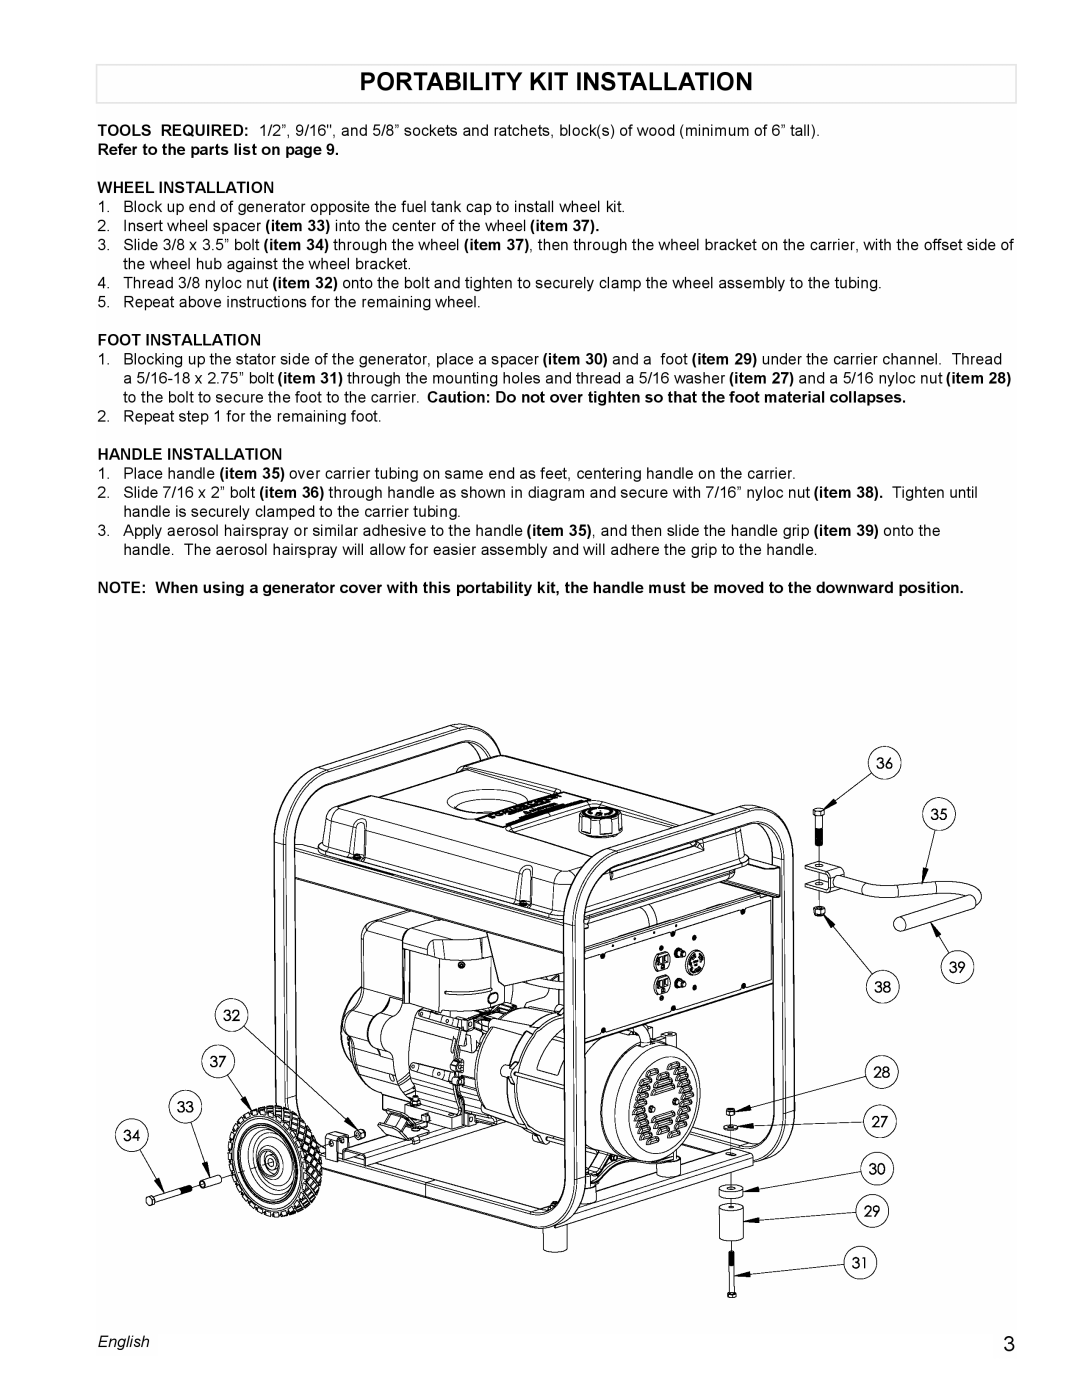 Powermate PM0525303.01 manual Portability Kit Installation, Refer to the parts list on page, Wheel Installation, English 